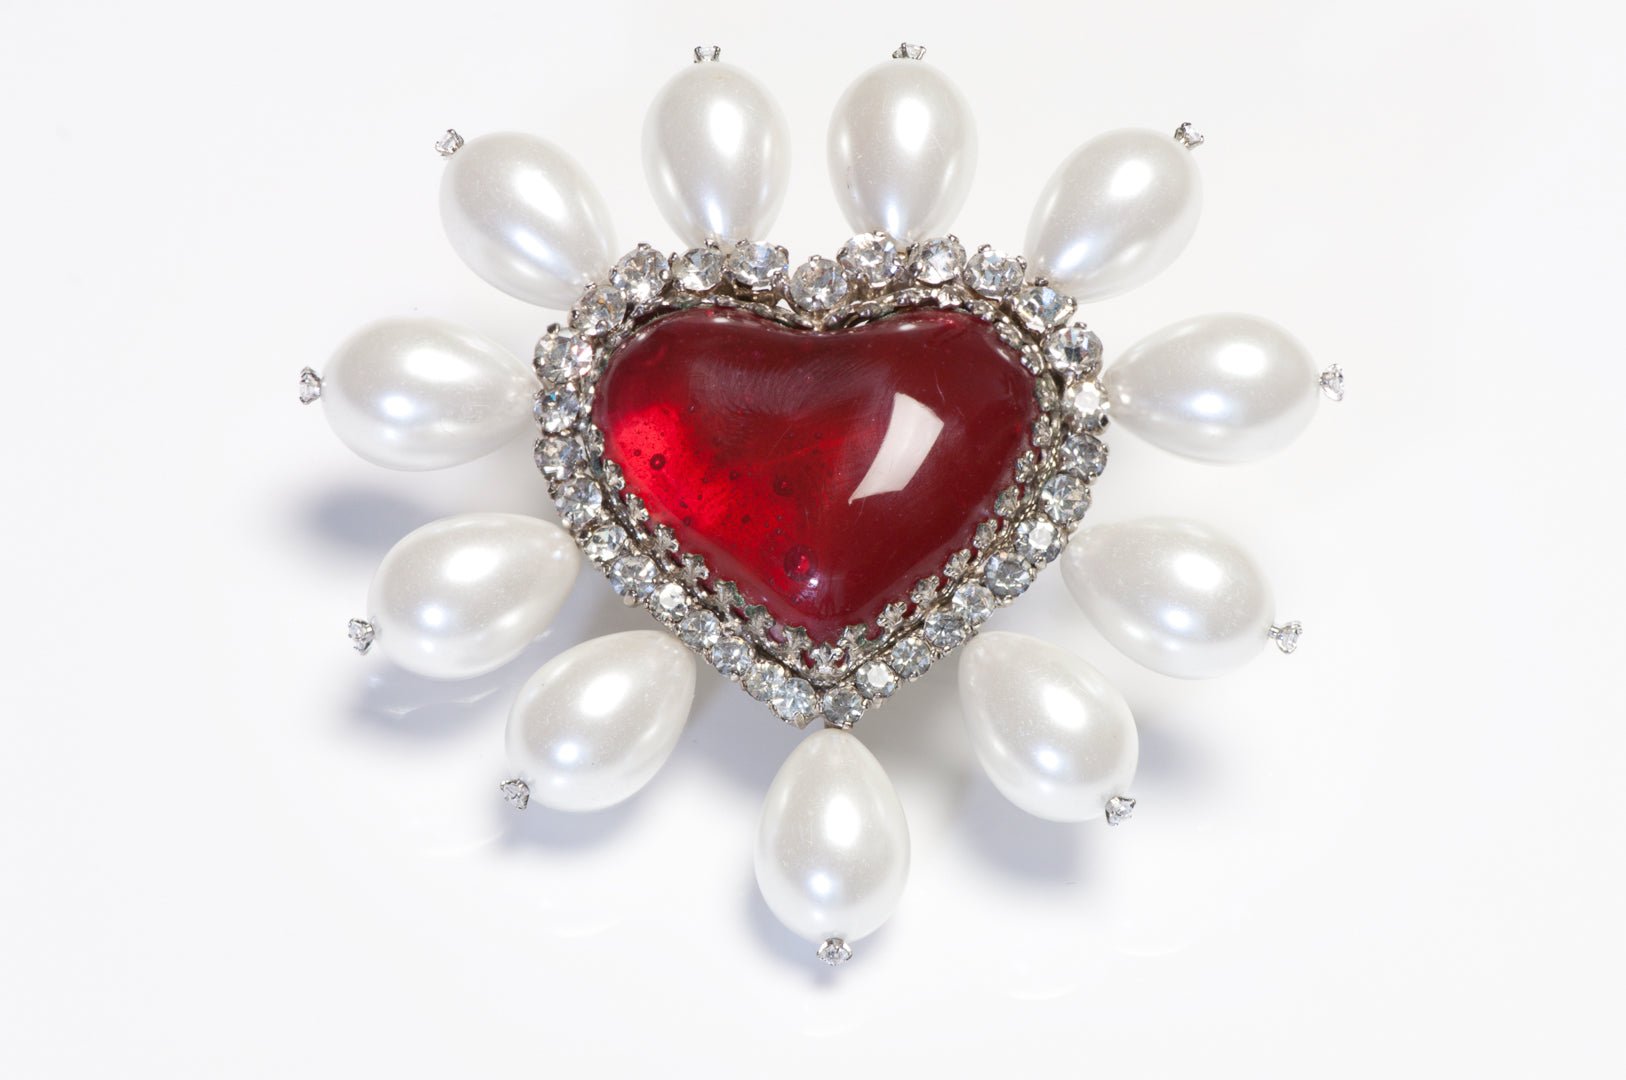 Christian Dior Paris Couture 1950’s Maison Gripoix Red Glass Pearl Heart Brooch - DSF Antique Jewelry